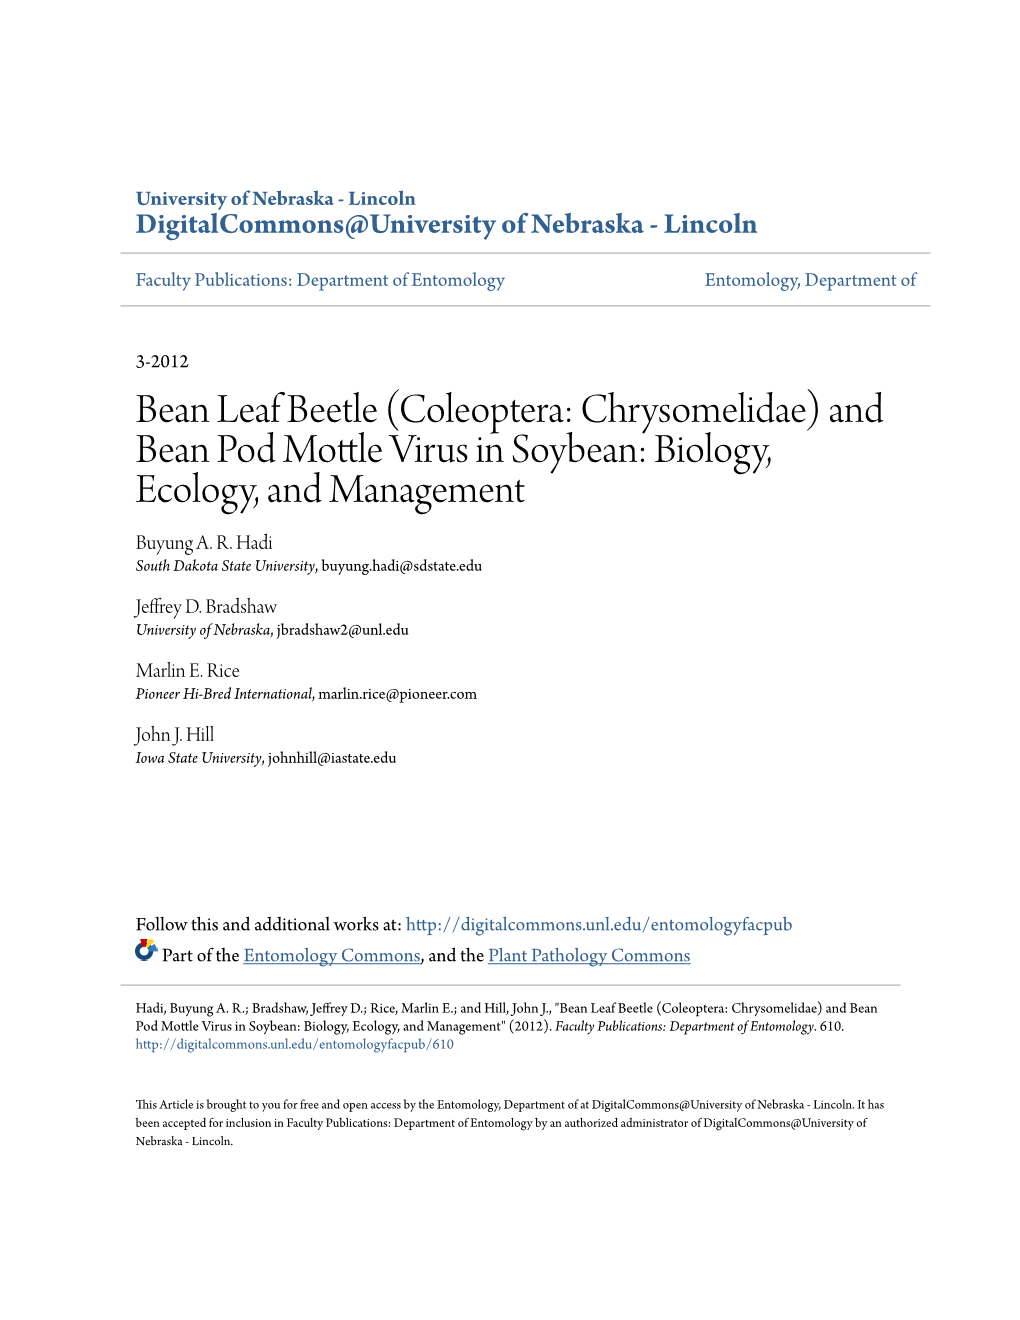 Bean Leaf Beetle (Coleoptera: Chrysomelidae) and Bean Pod Mottle Irv Us in Soybean: Biology, Ecology, and Management Buyung A